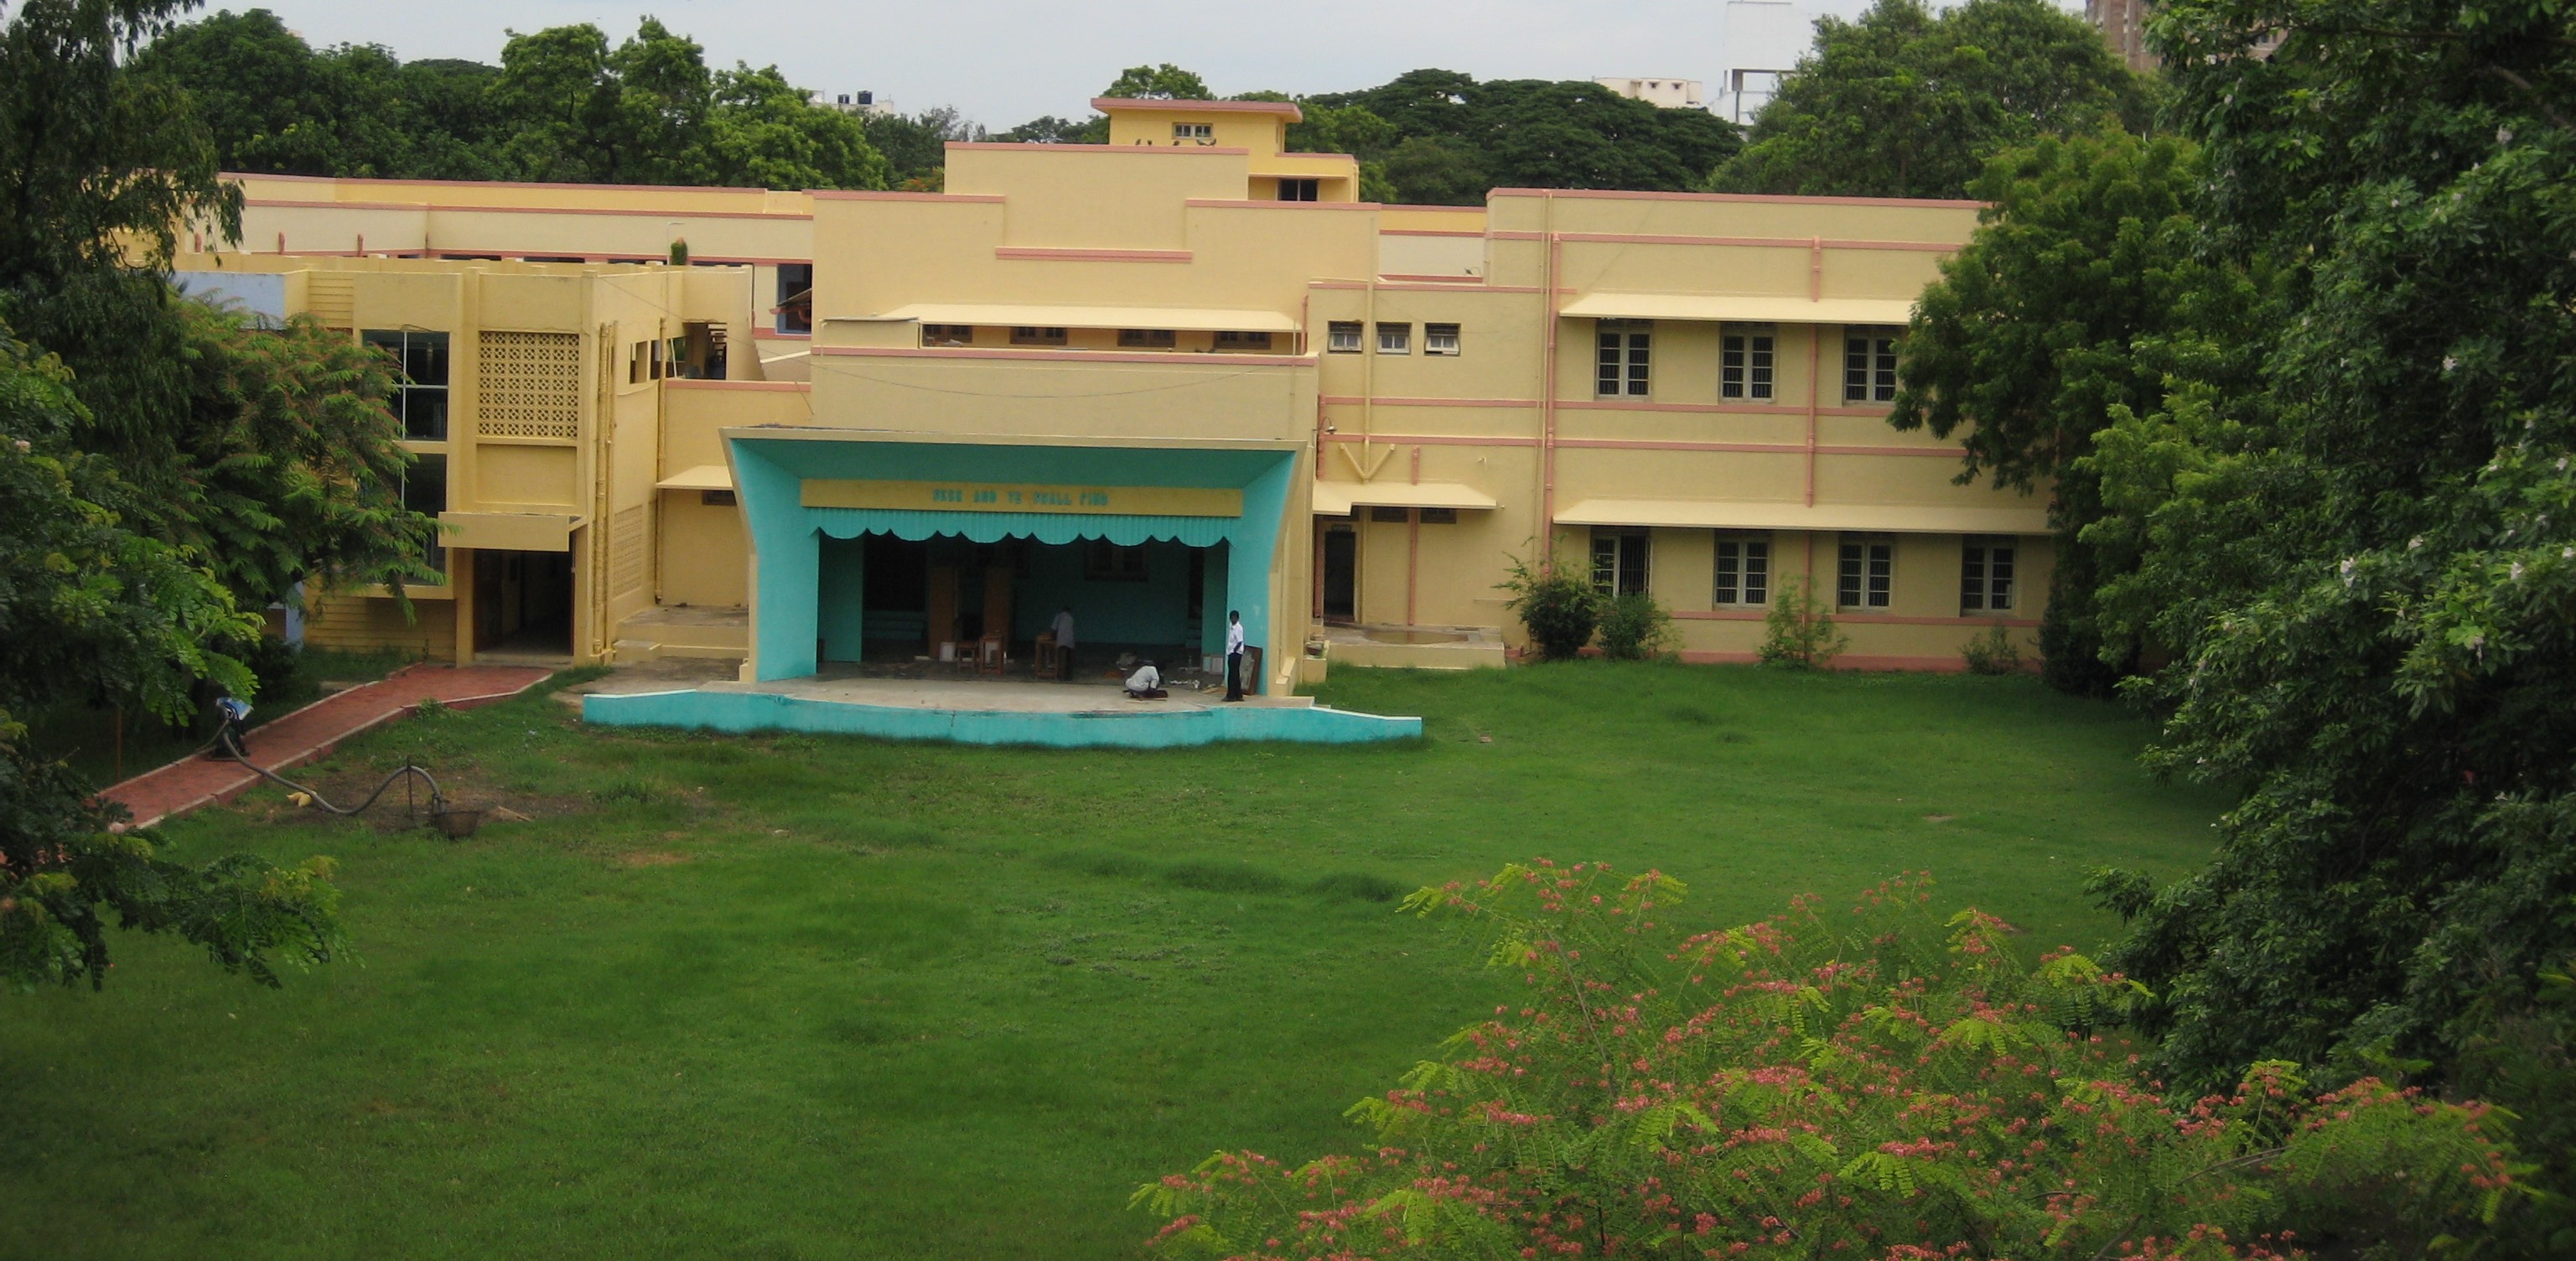 St. Christopher’s College of Education, Chennai Image